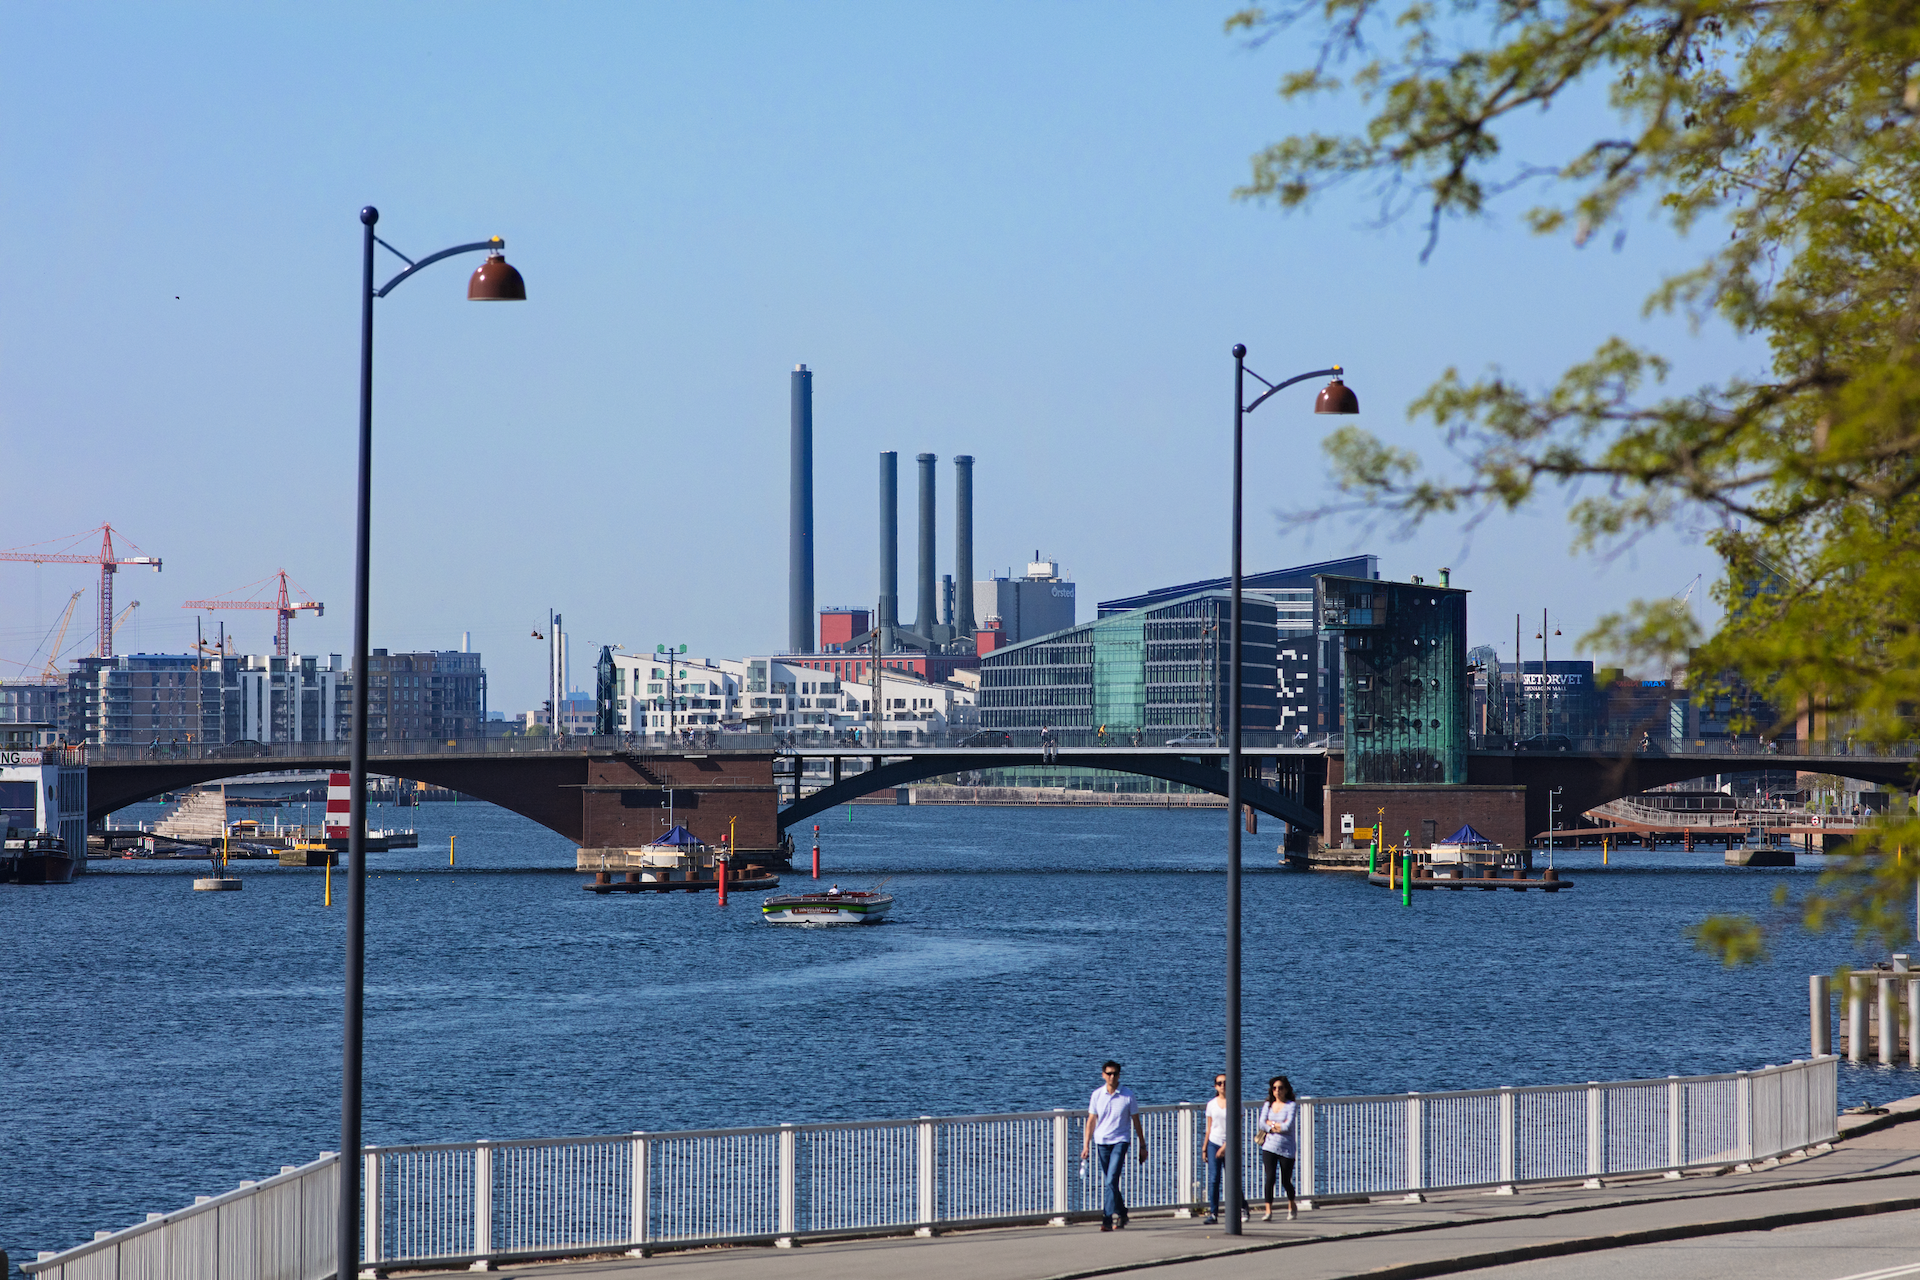 people walking in front of Copenhagen bridge and harbour bath with industry facility in background